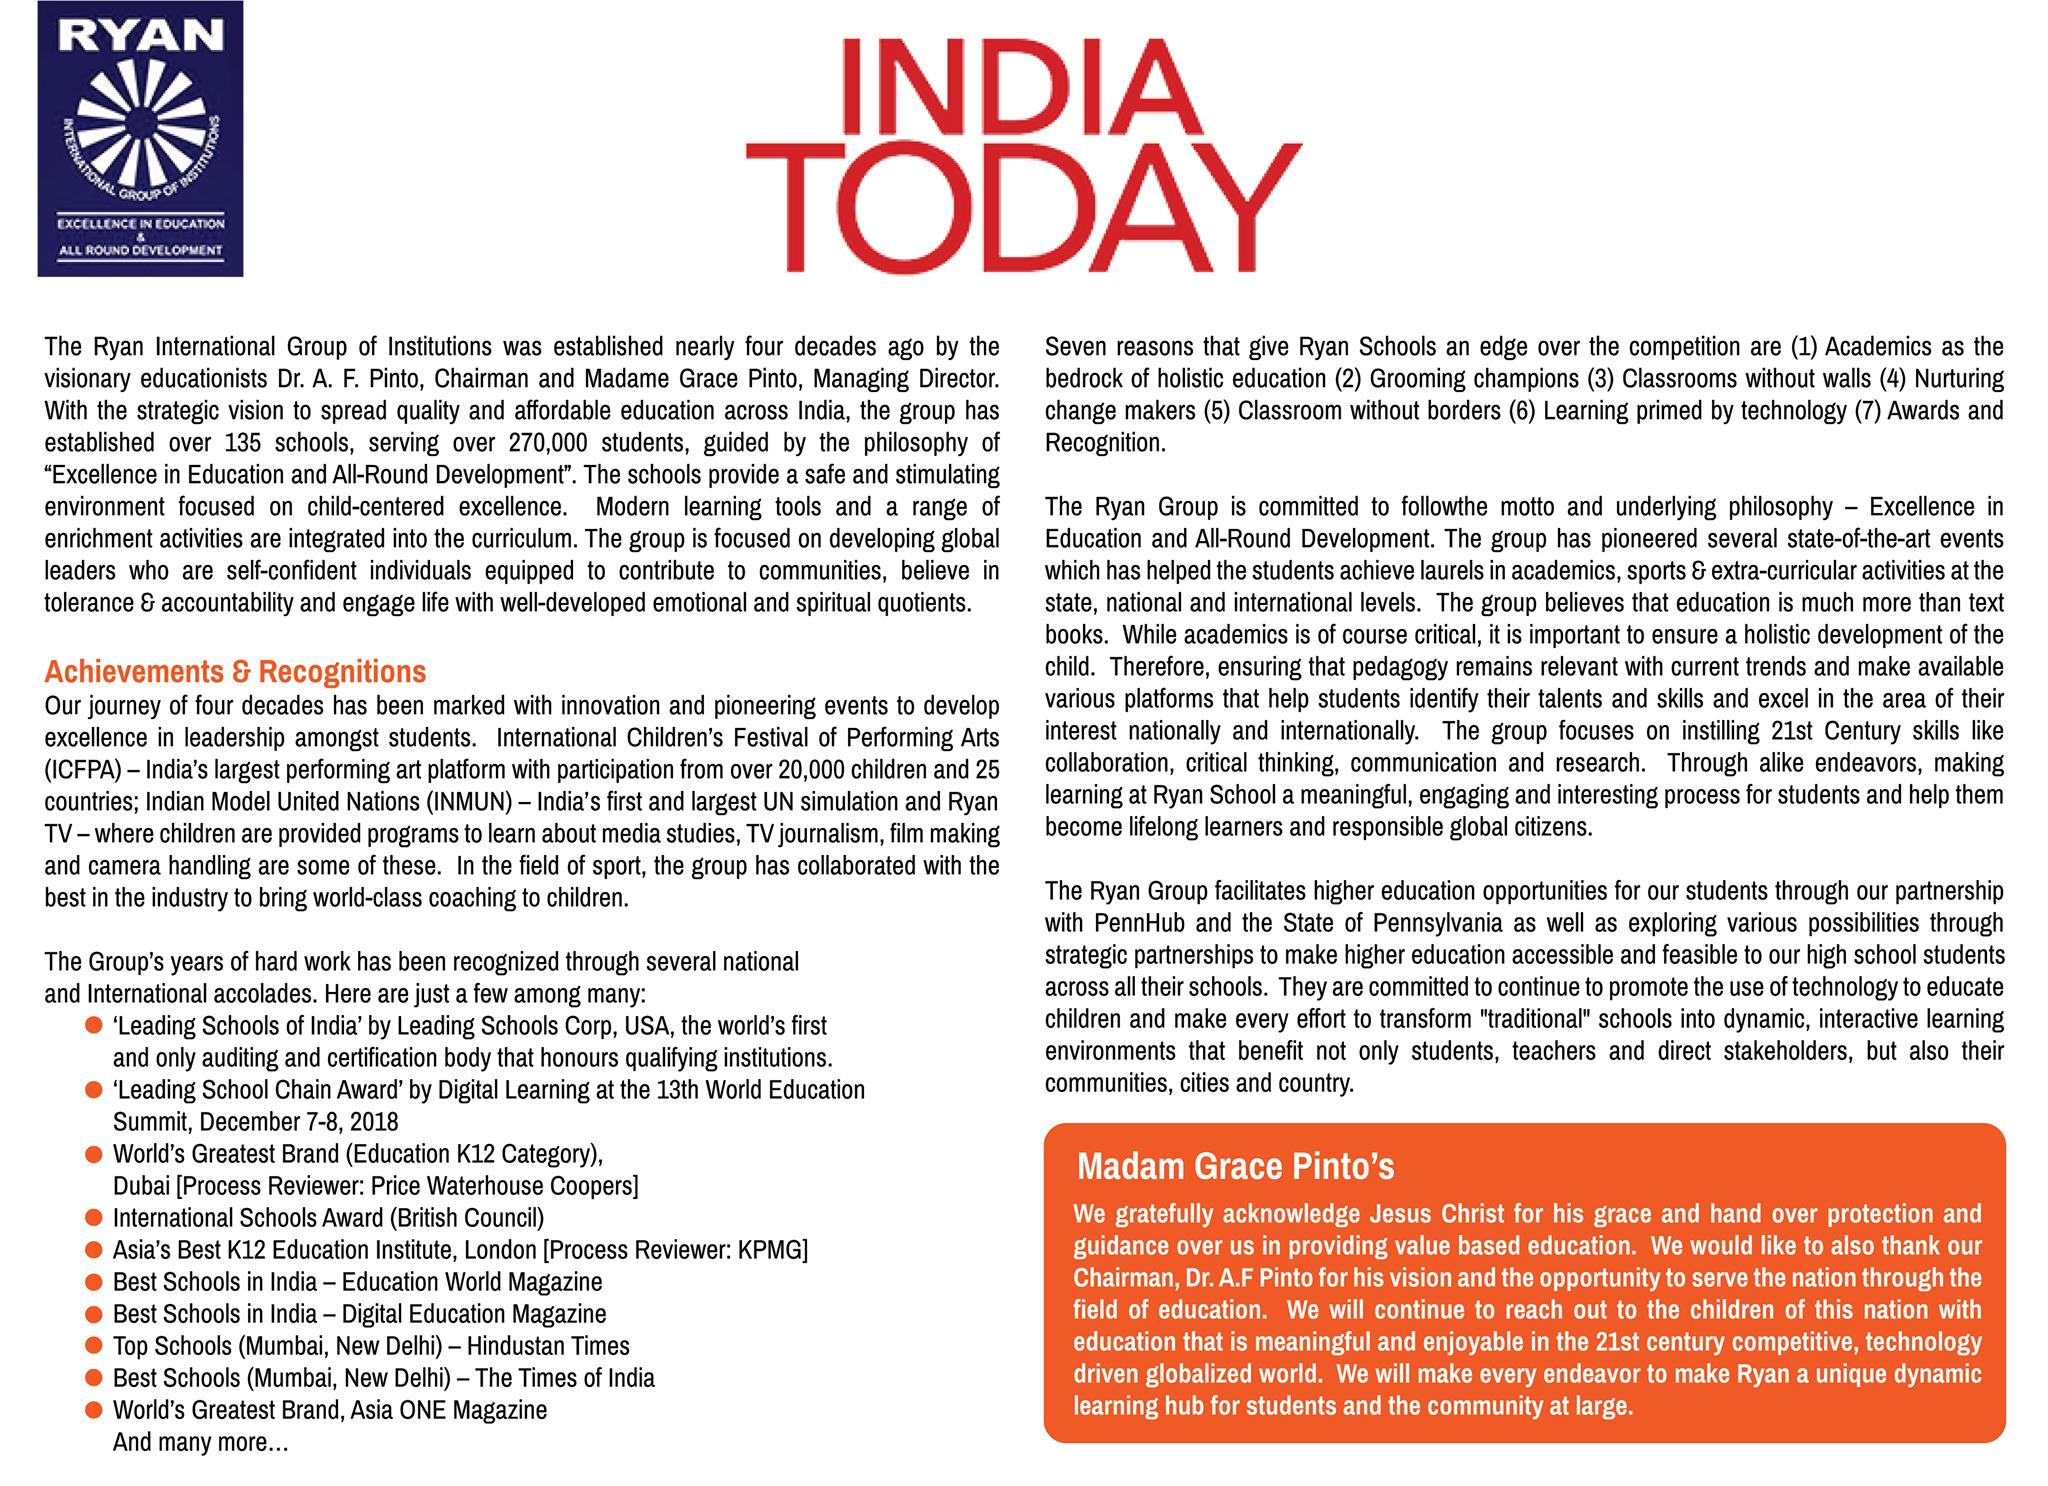 India Today recognizes Dr. Madam Grace Pinto as 'National Builders in the Education Sector'